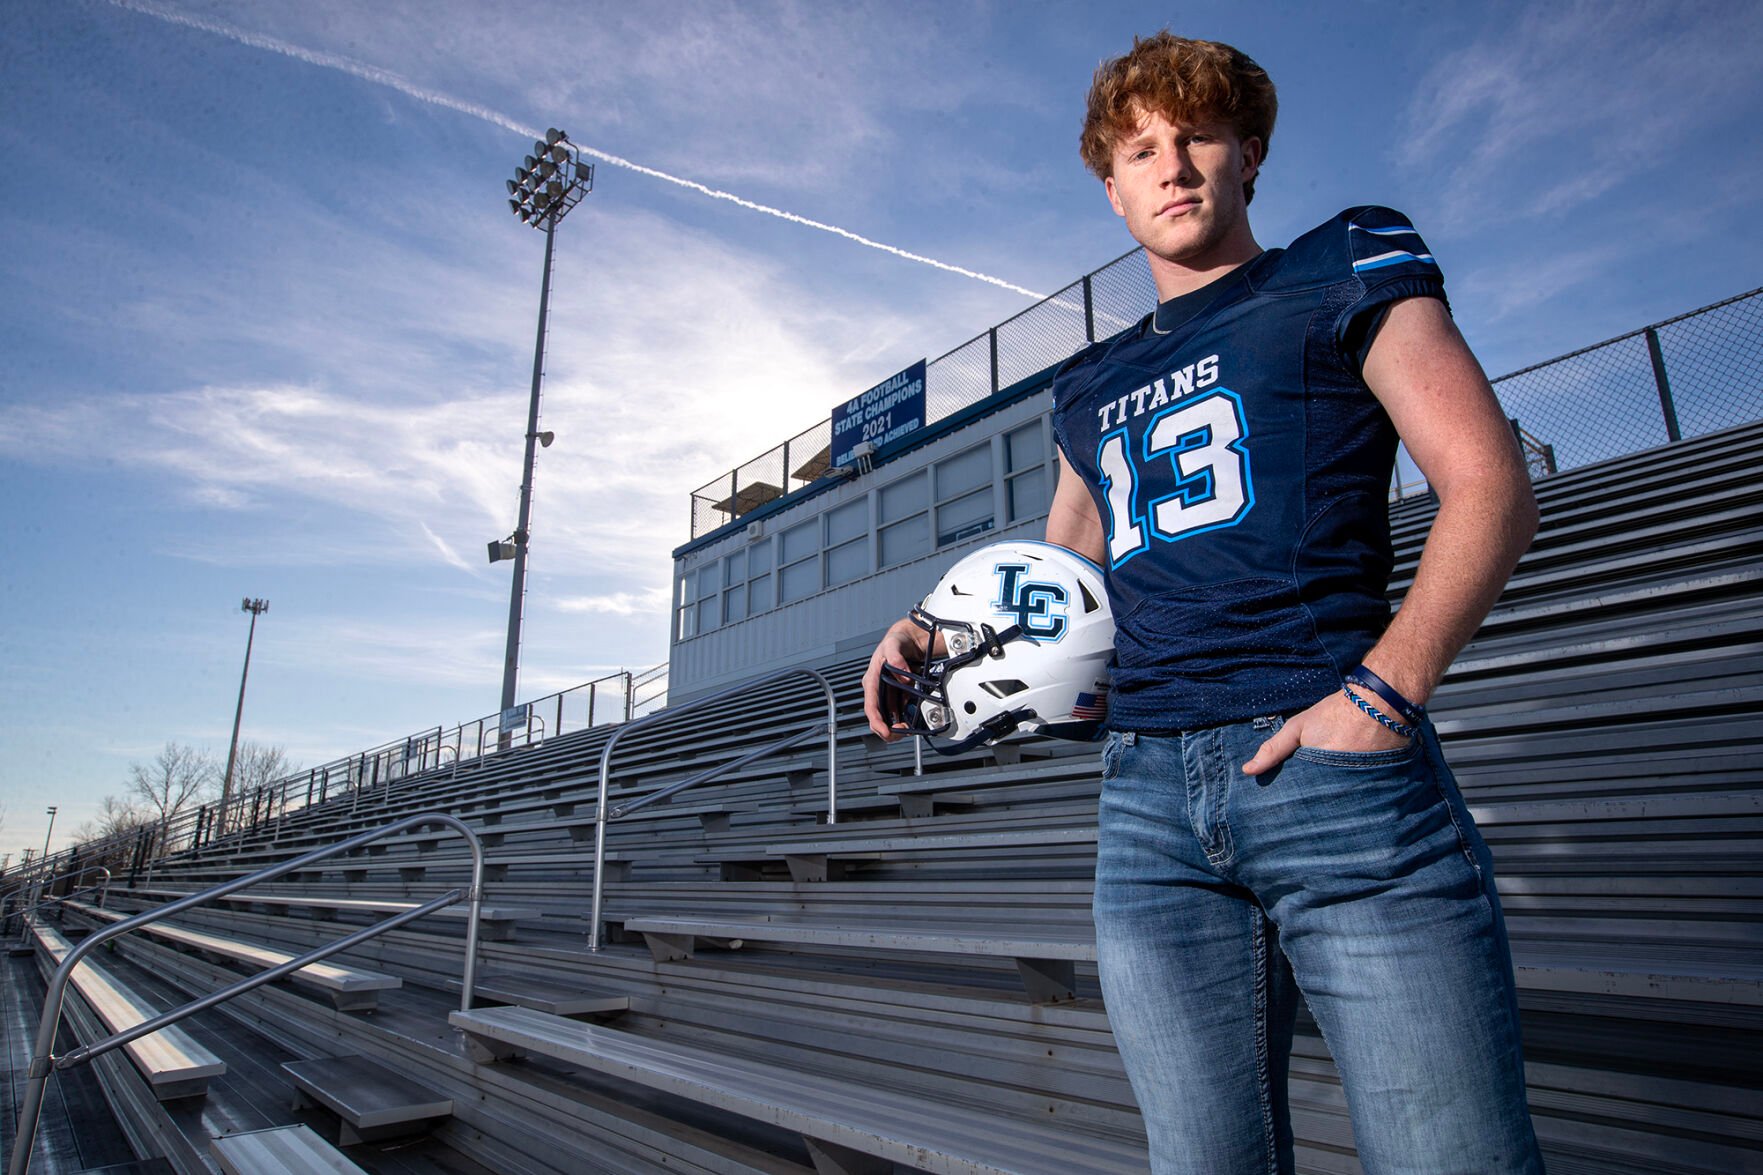 Curtis Witte: All-City Player of the Year Shatters Records at Lewis Central